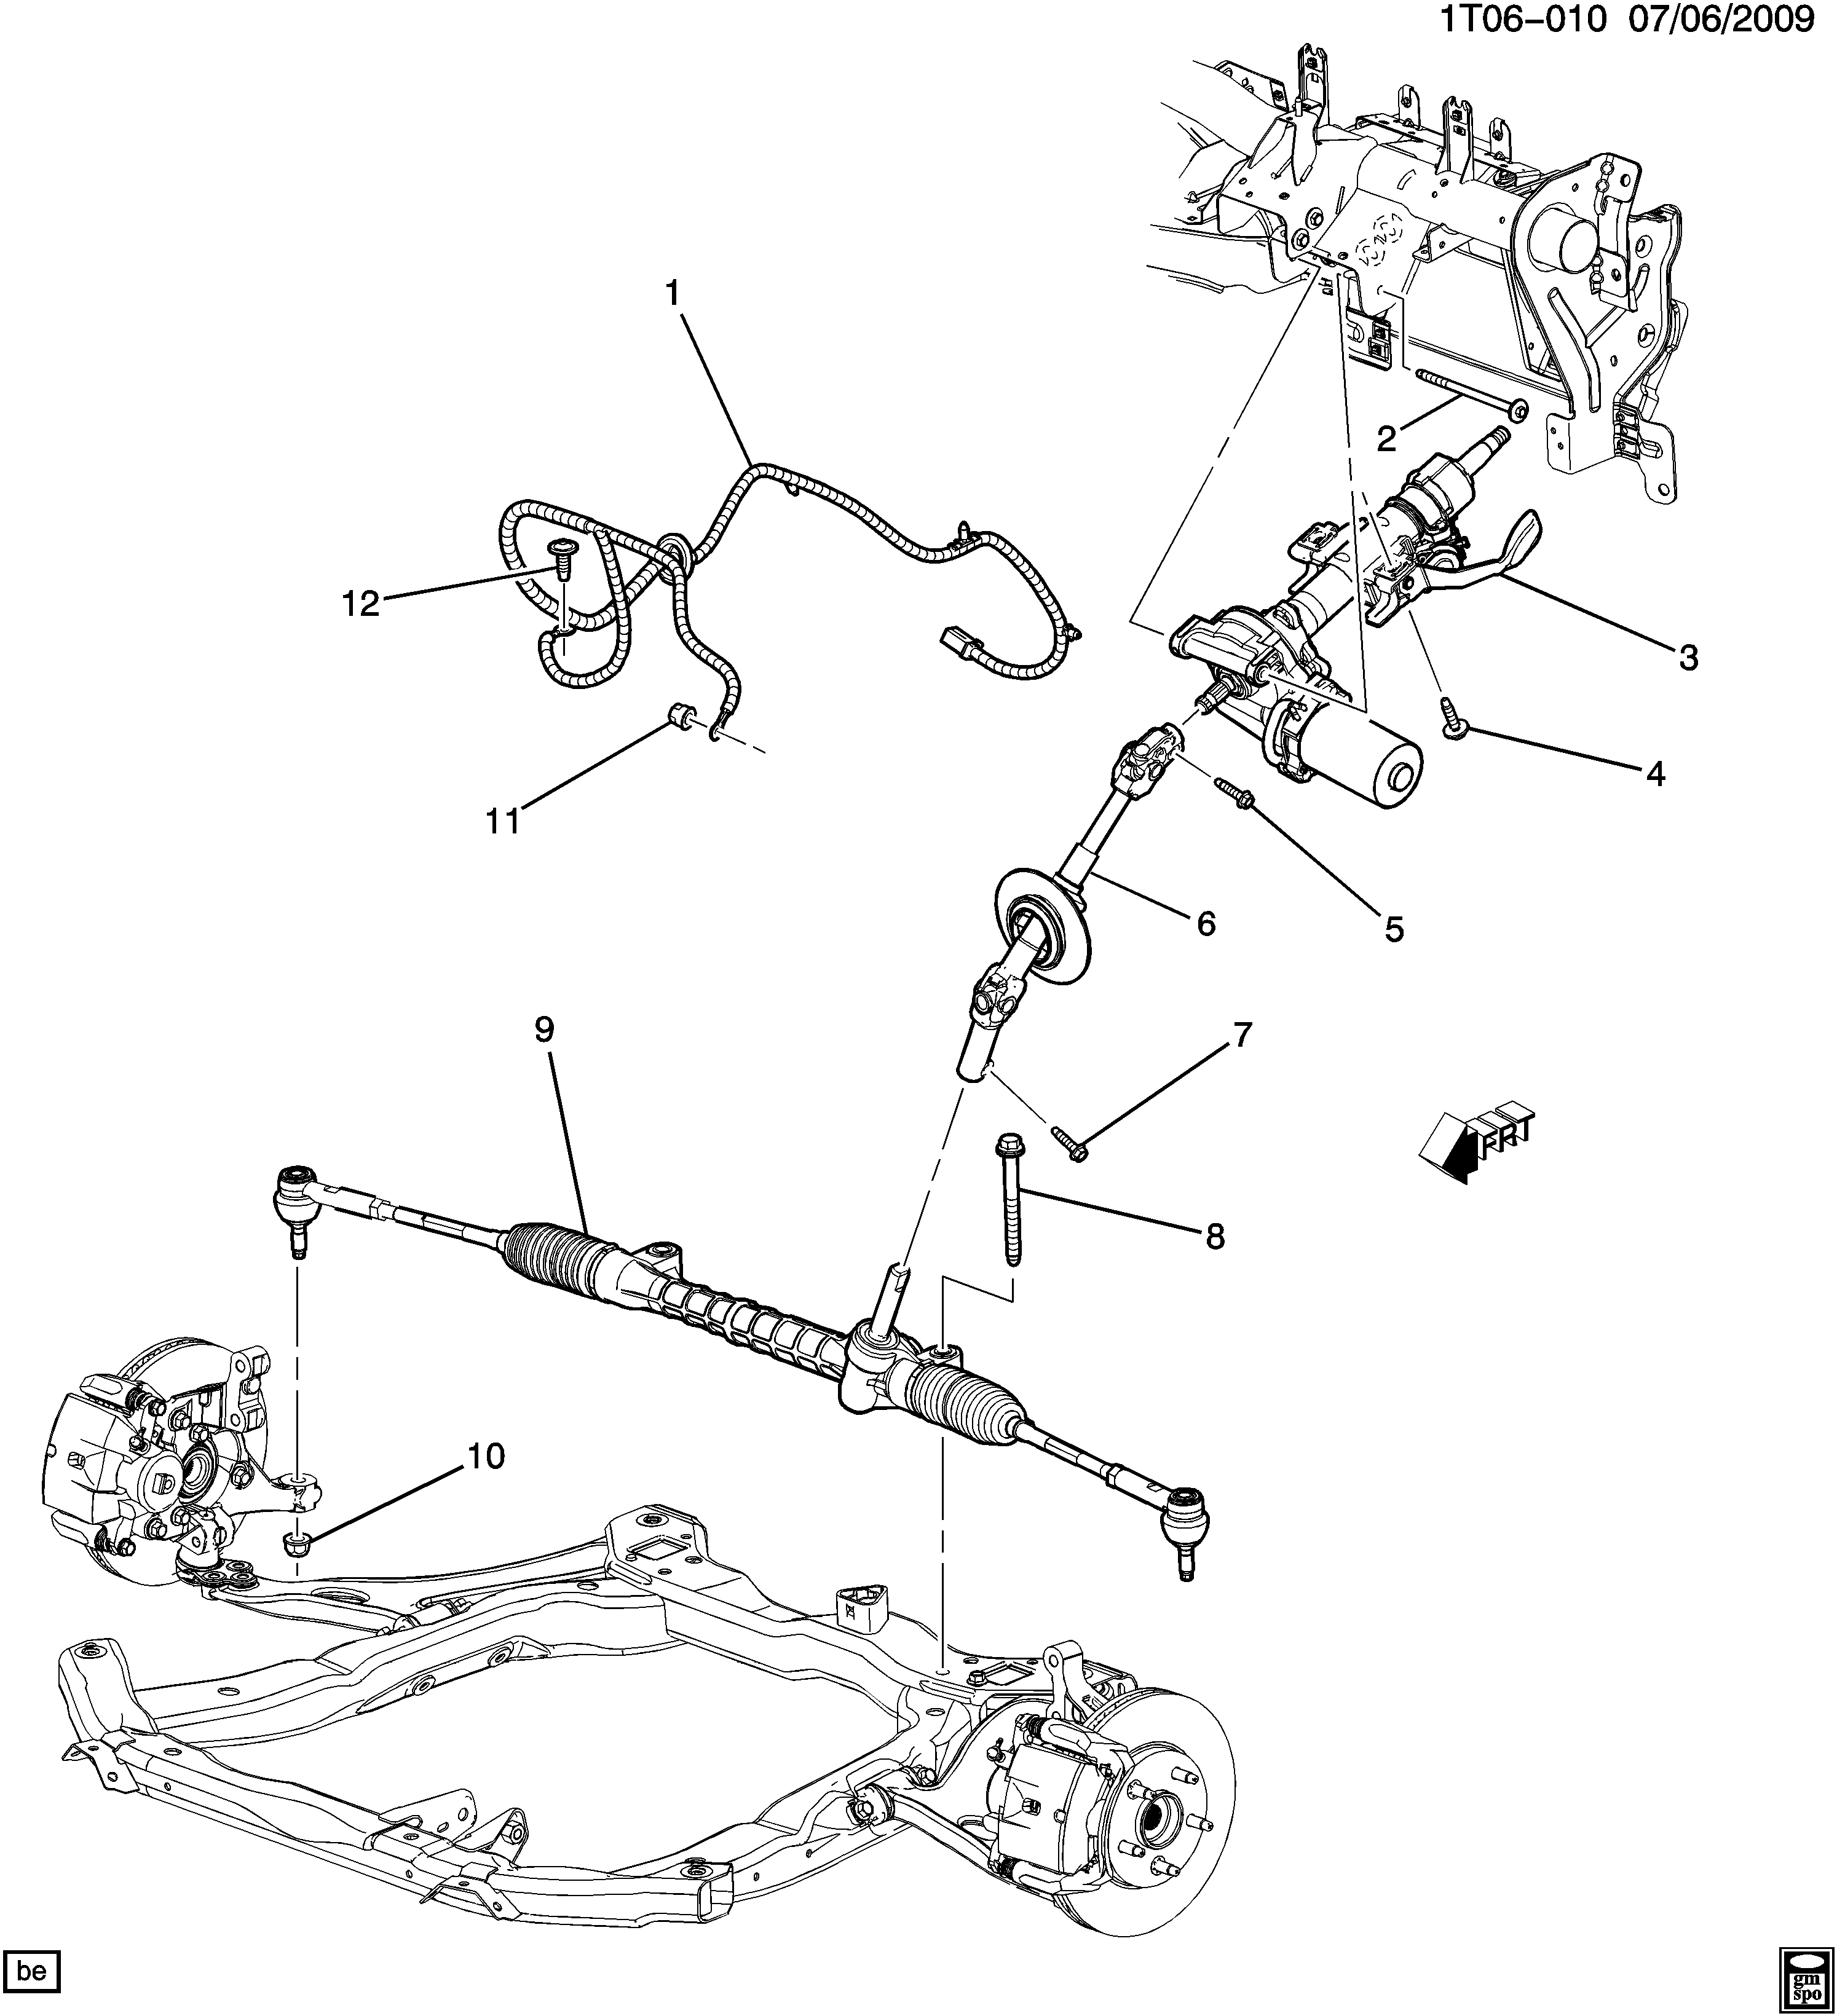 2009-2011 A STEERING SYSTEM & RELATED PARTS